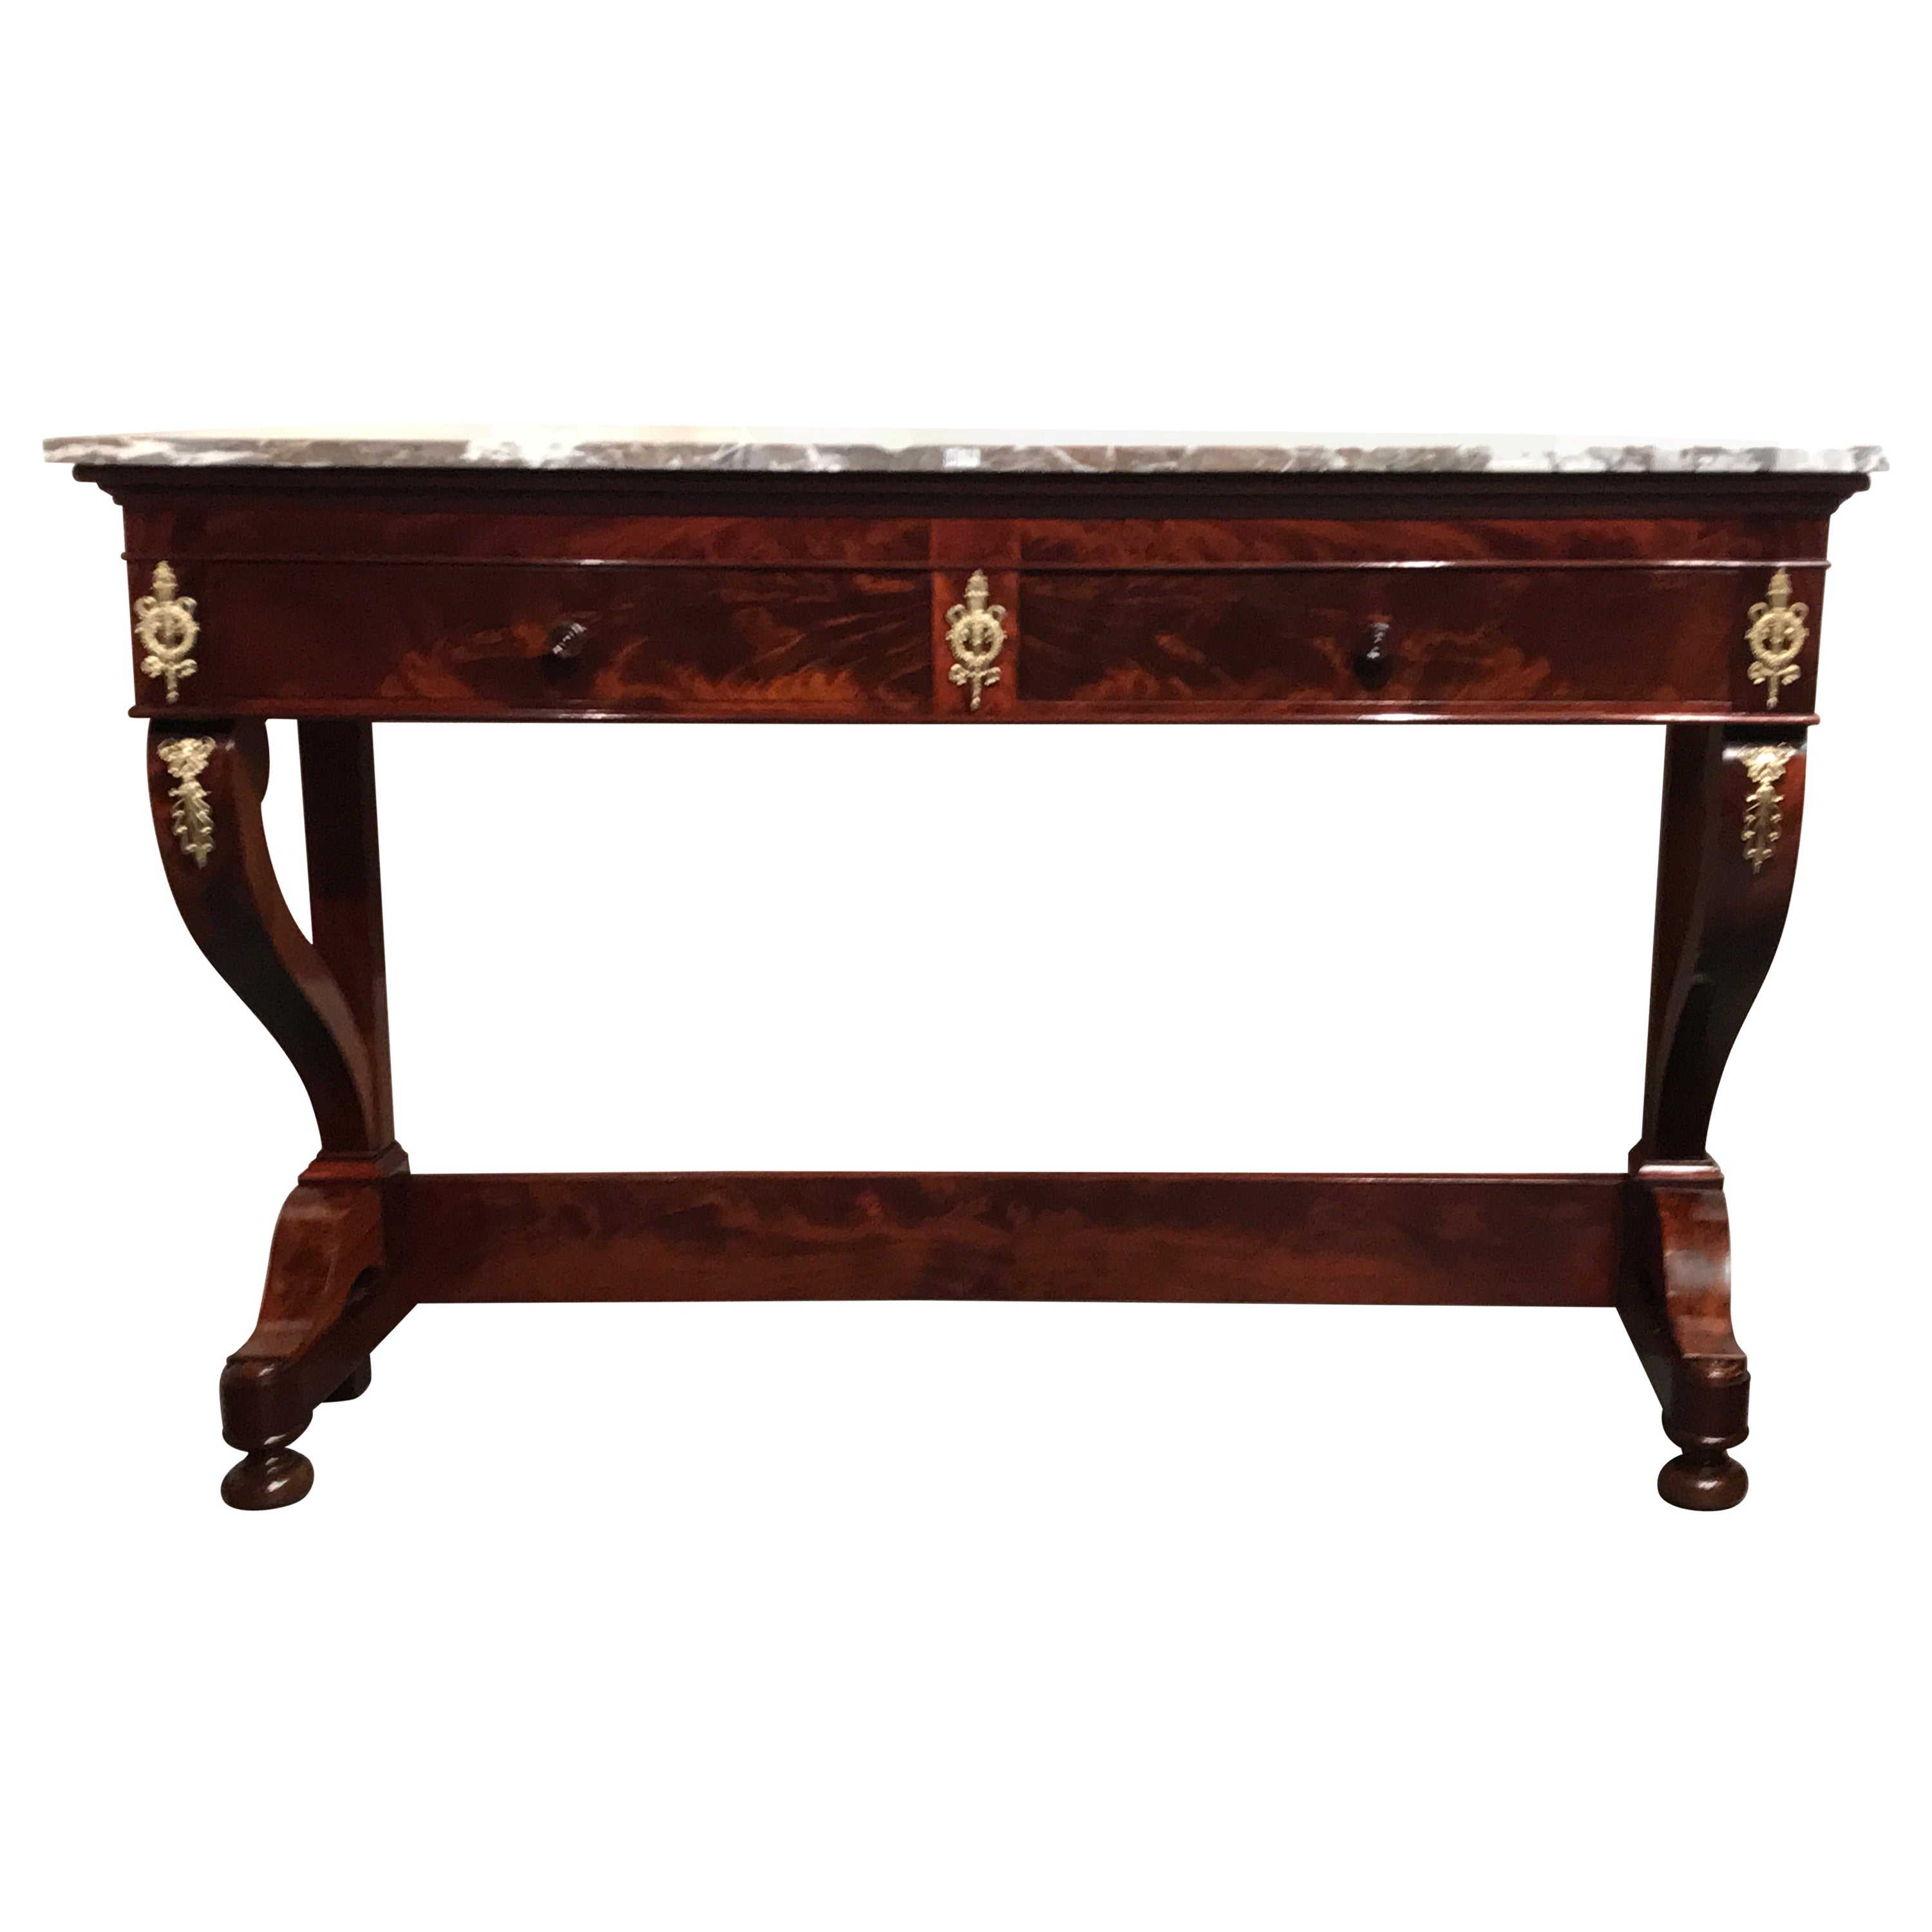 Console Table, France, Restauration Period 1810-20, Mahogany